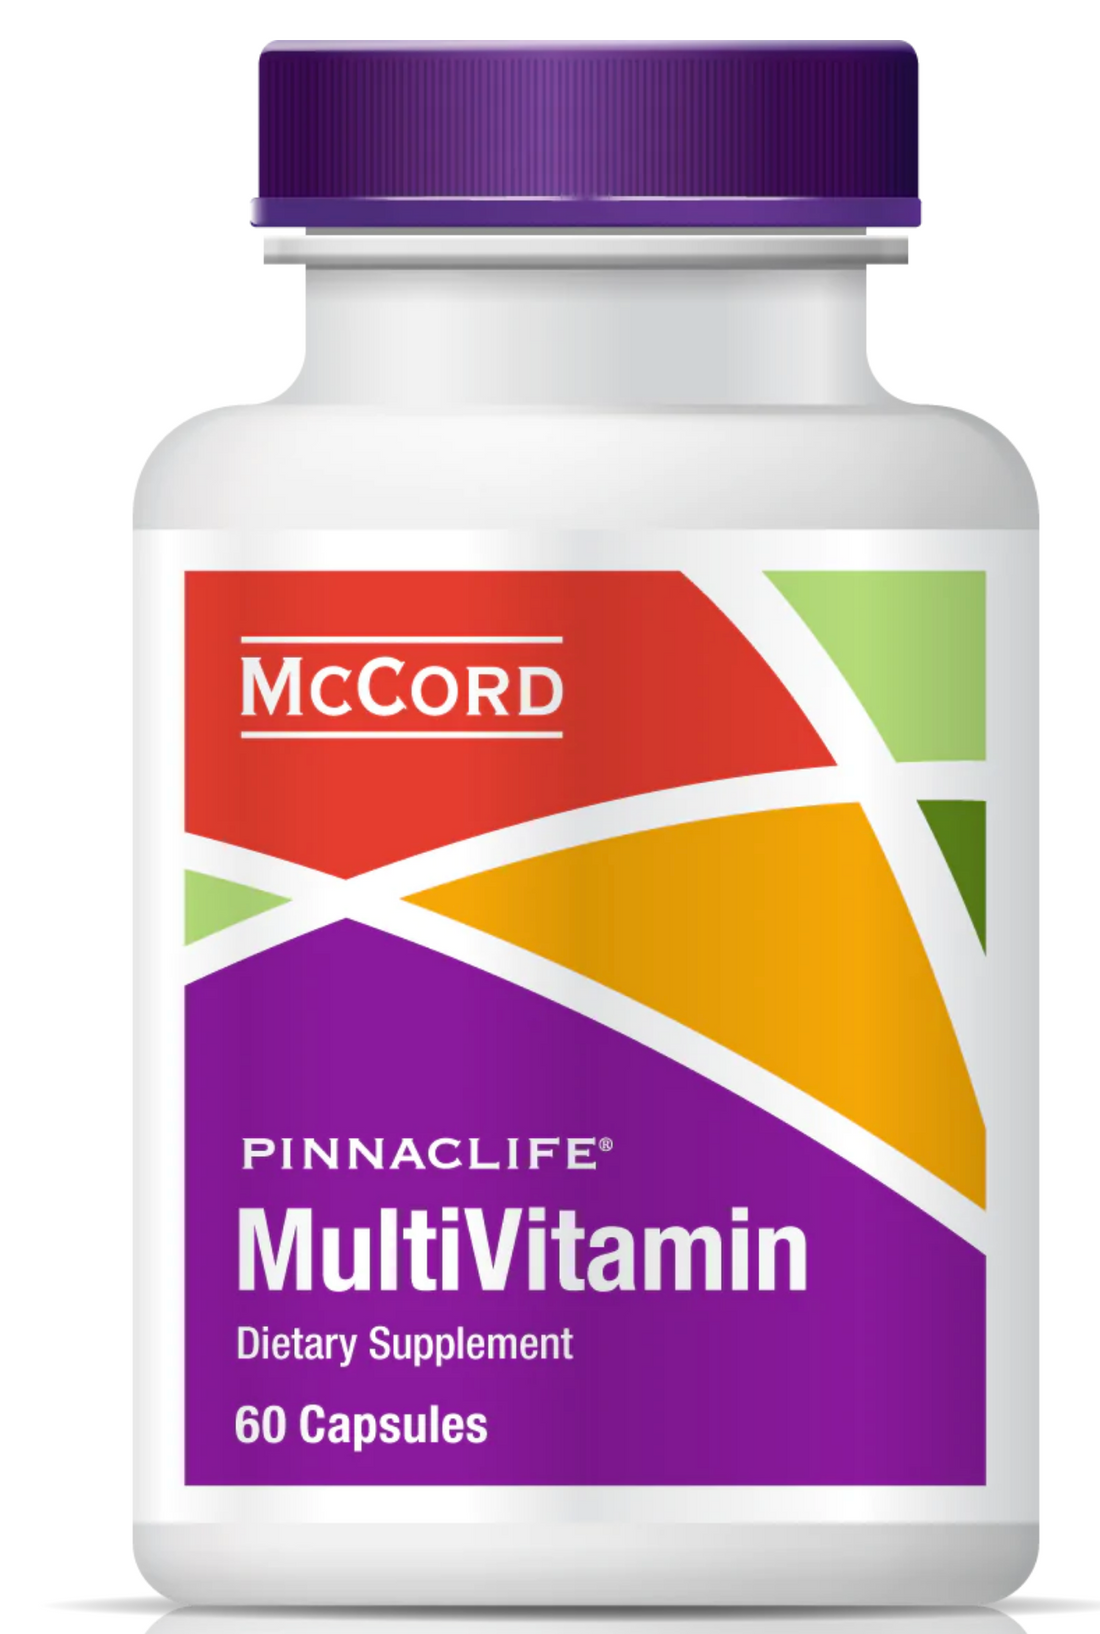 Vitamin Selection: 5 Things to Look for in a MultiVitamin